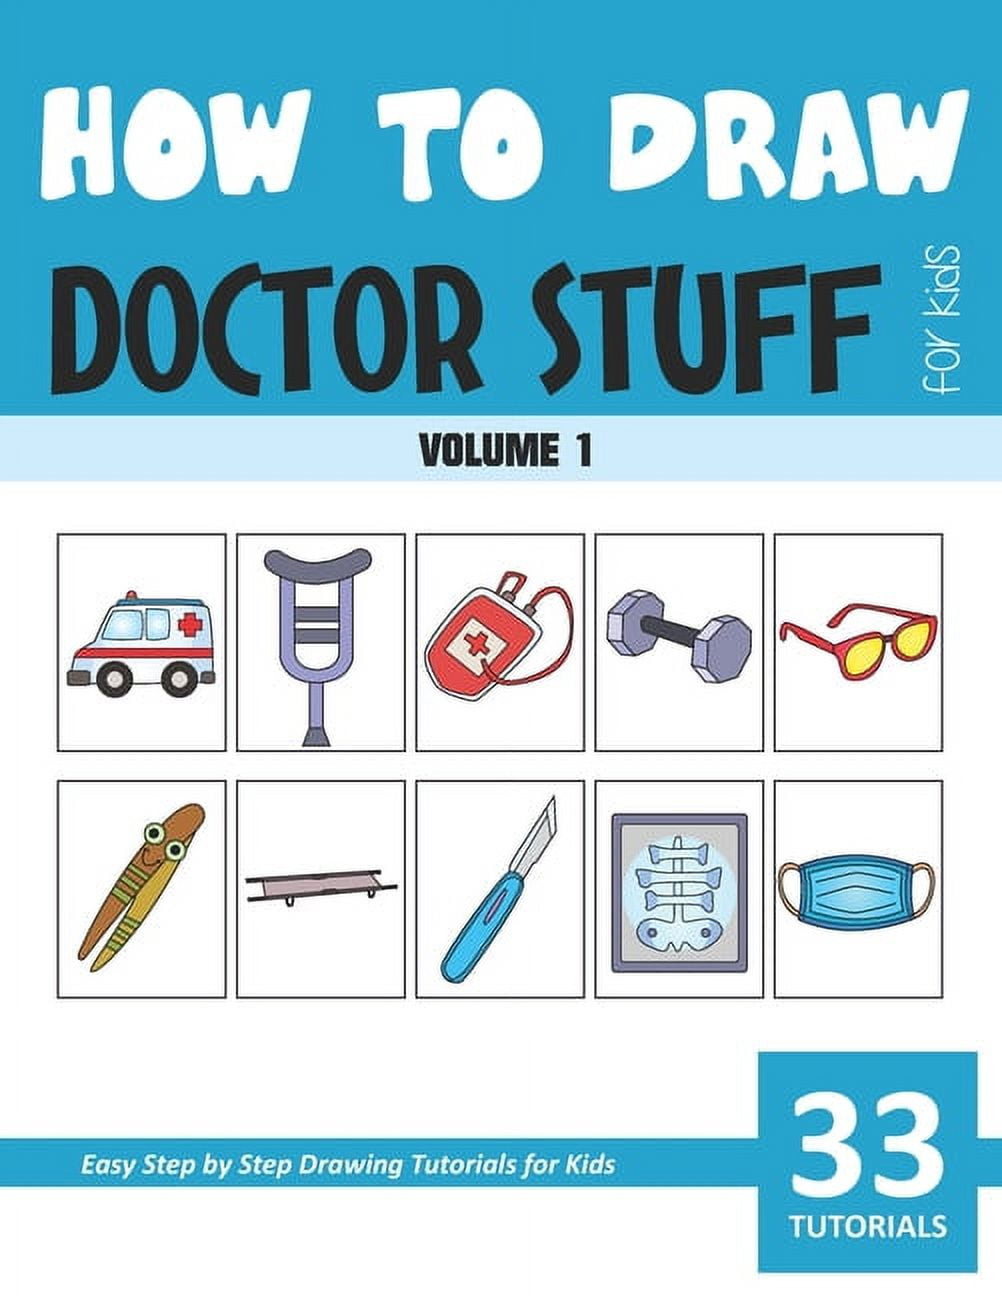 How to Draw Doctor Stuff for Kids - Volume 1 [Book]